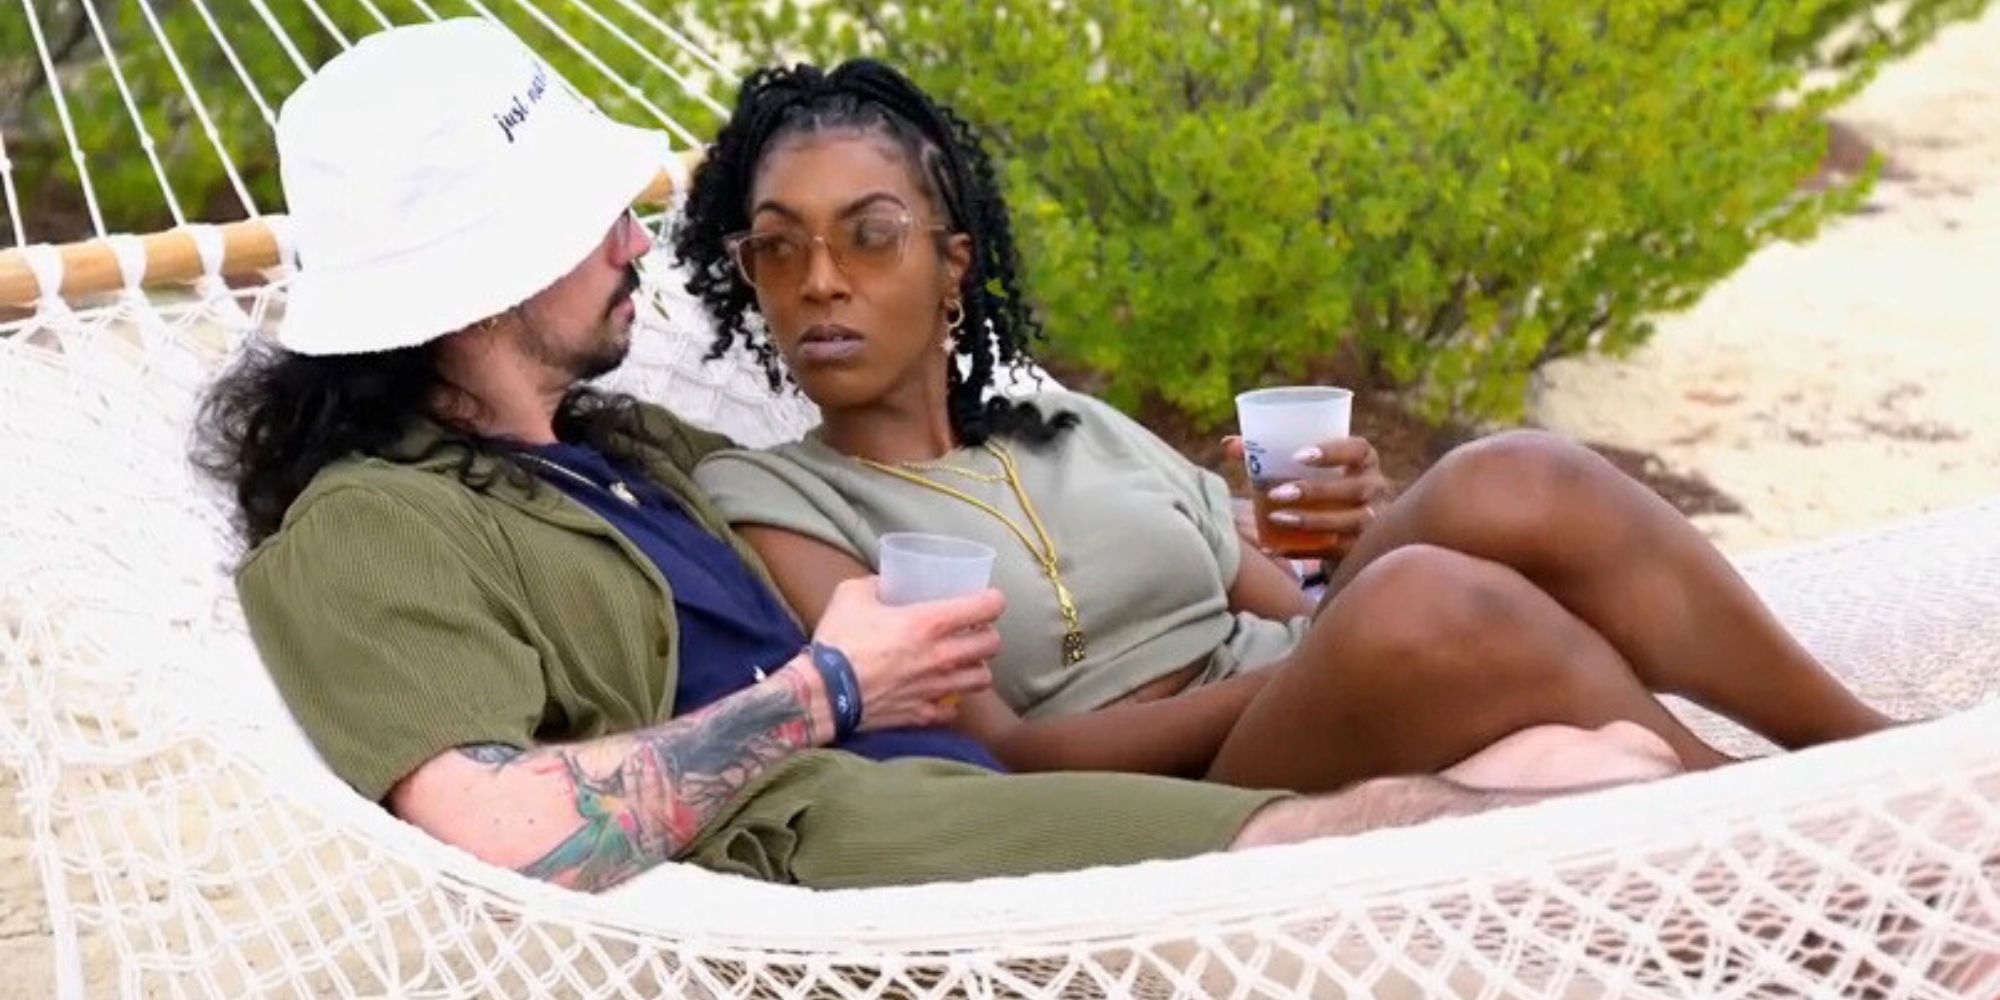 Lauren and Orion from Married at First Sight season 17 laying in hammock together